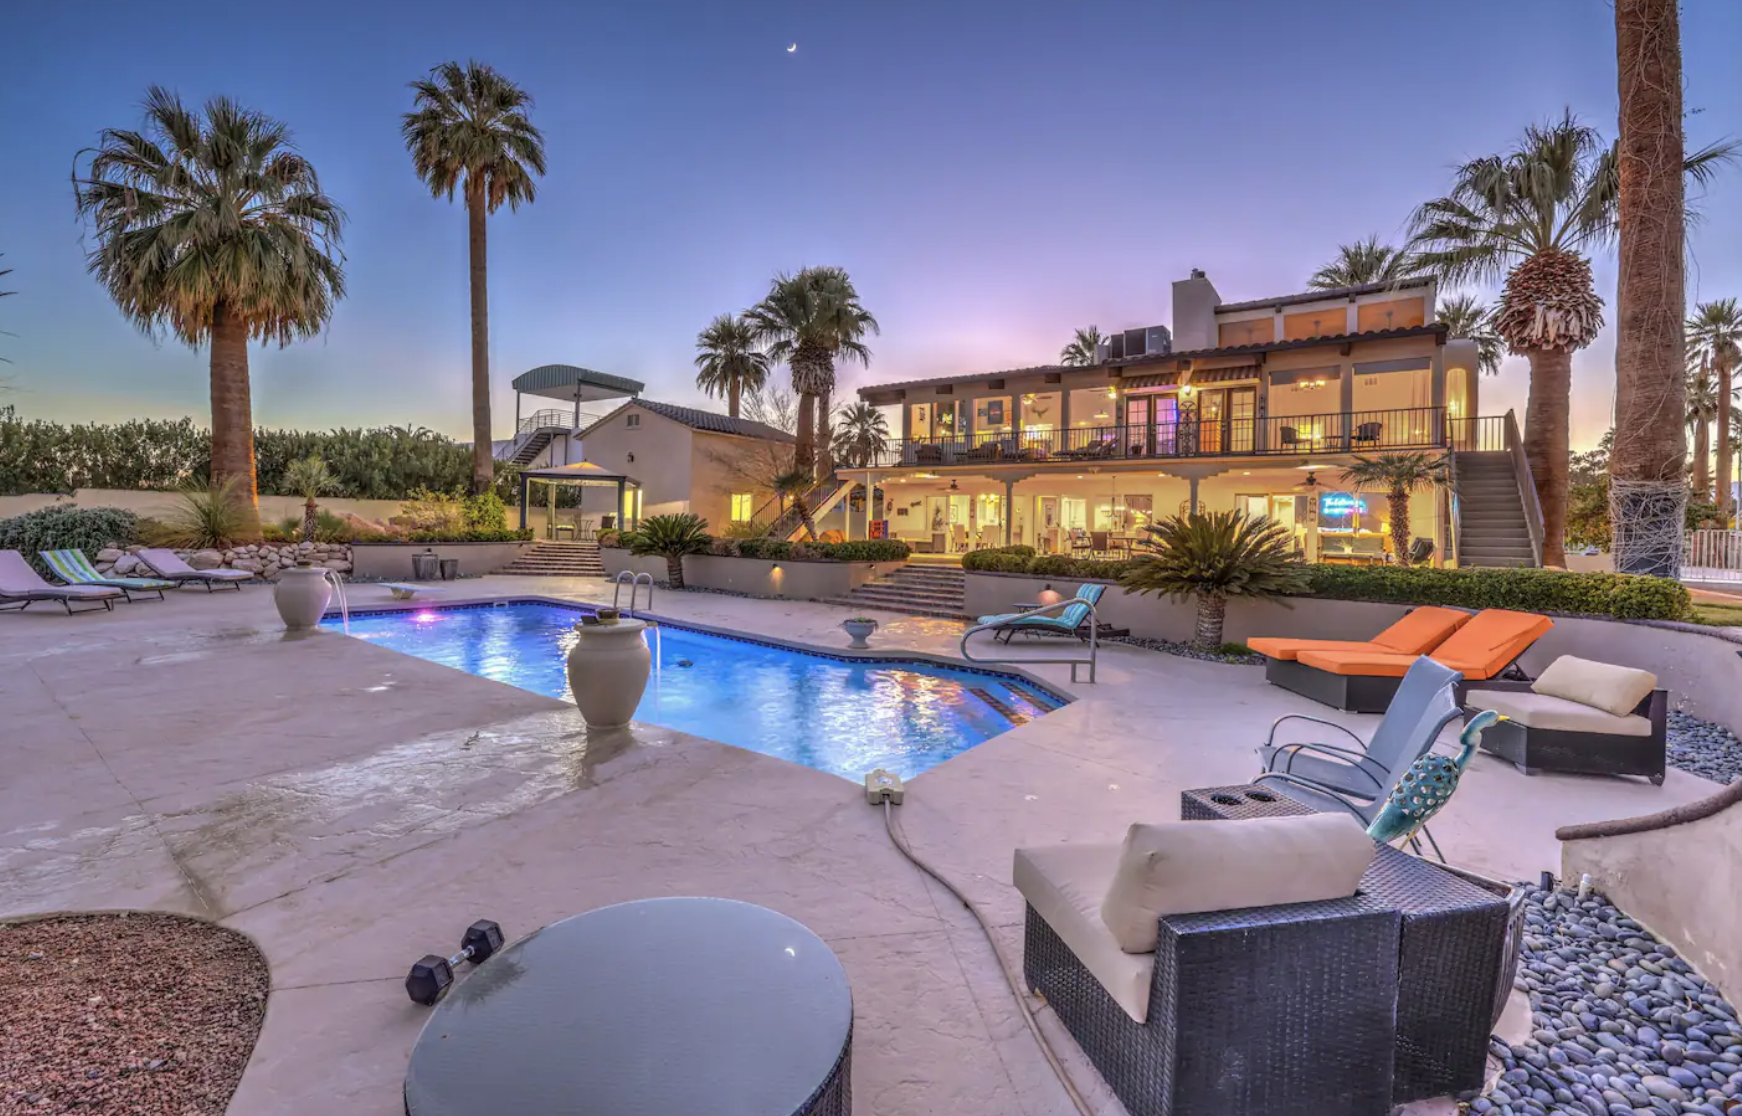 2-Story Airbnb house in Las Vegas with a pool, perfect for a bachelorette weekend